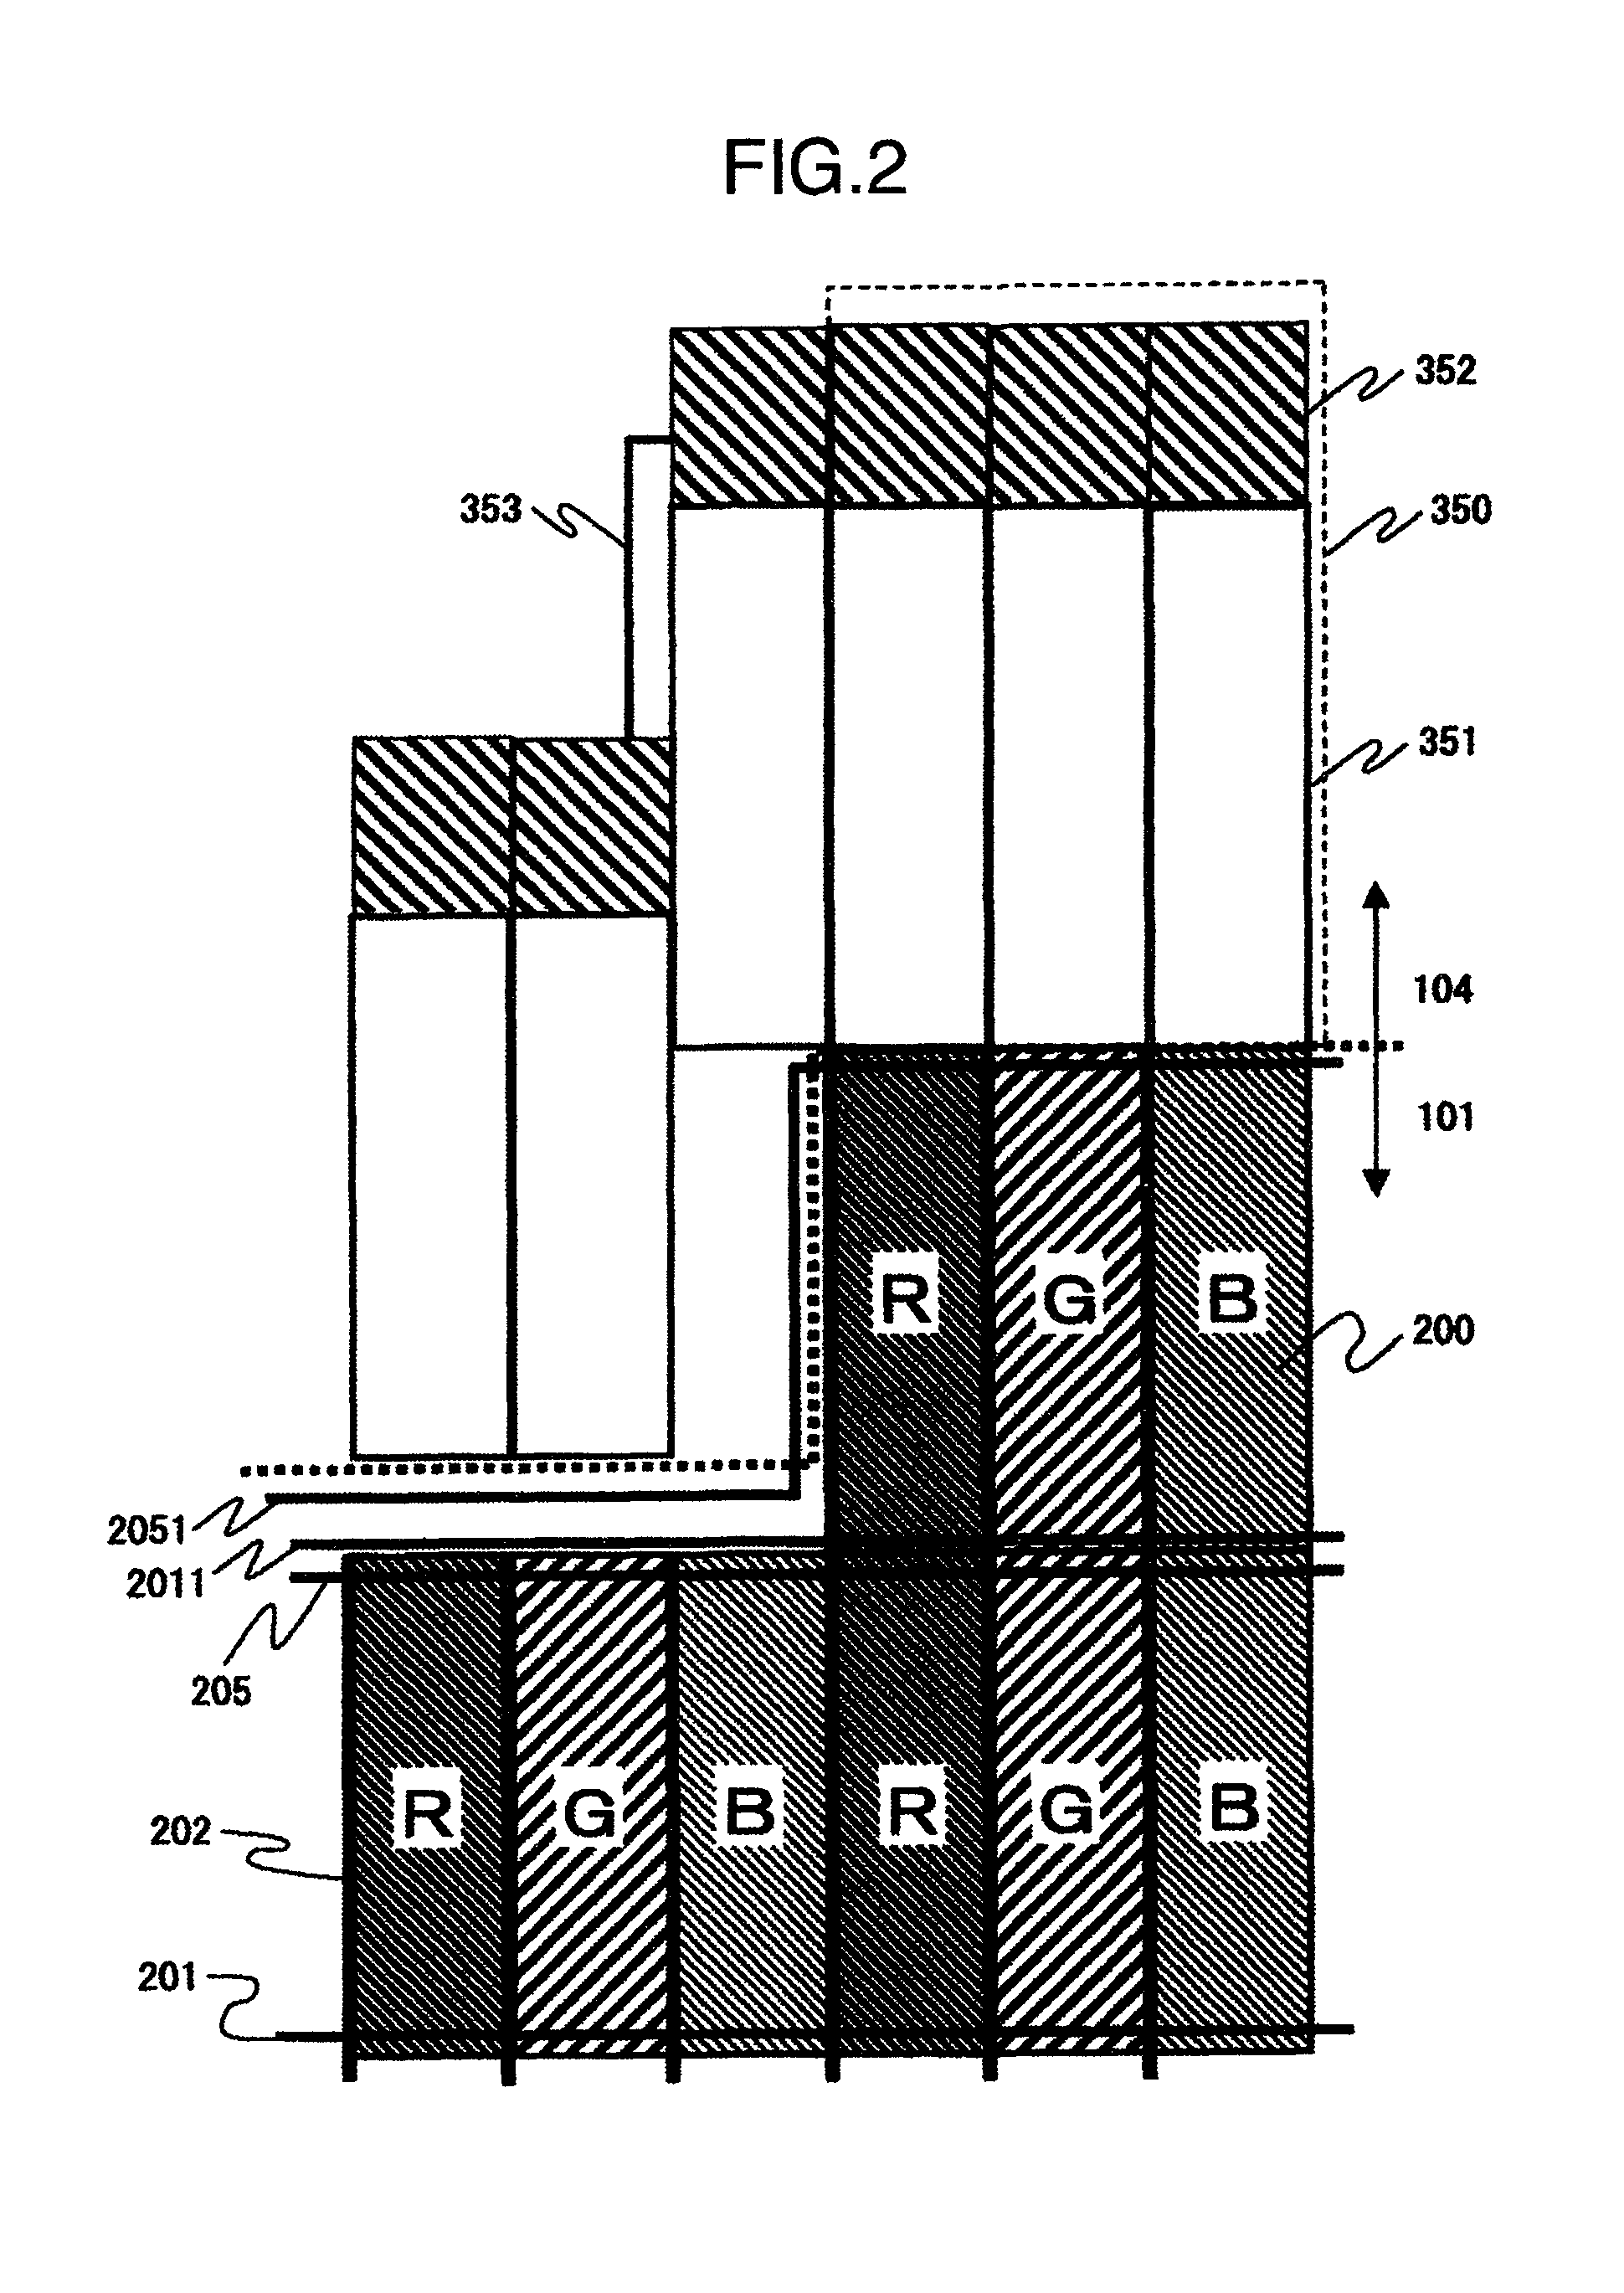 Display device having particular pixels and signal wiring internal circuits